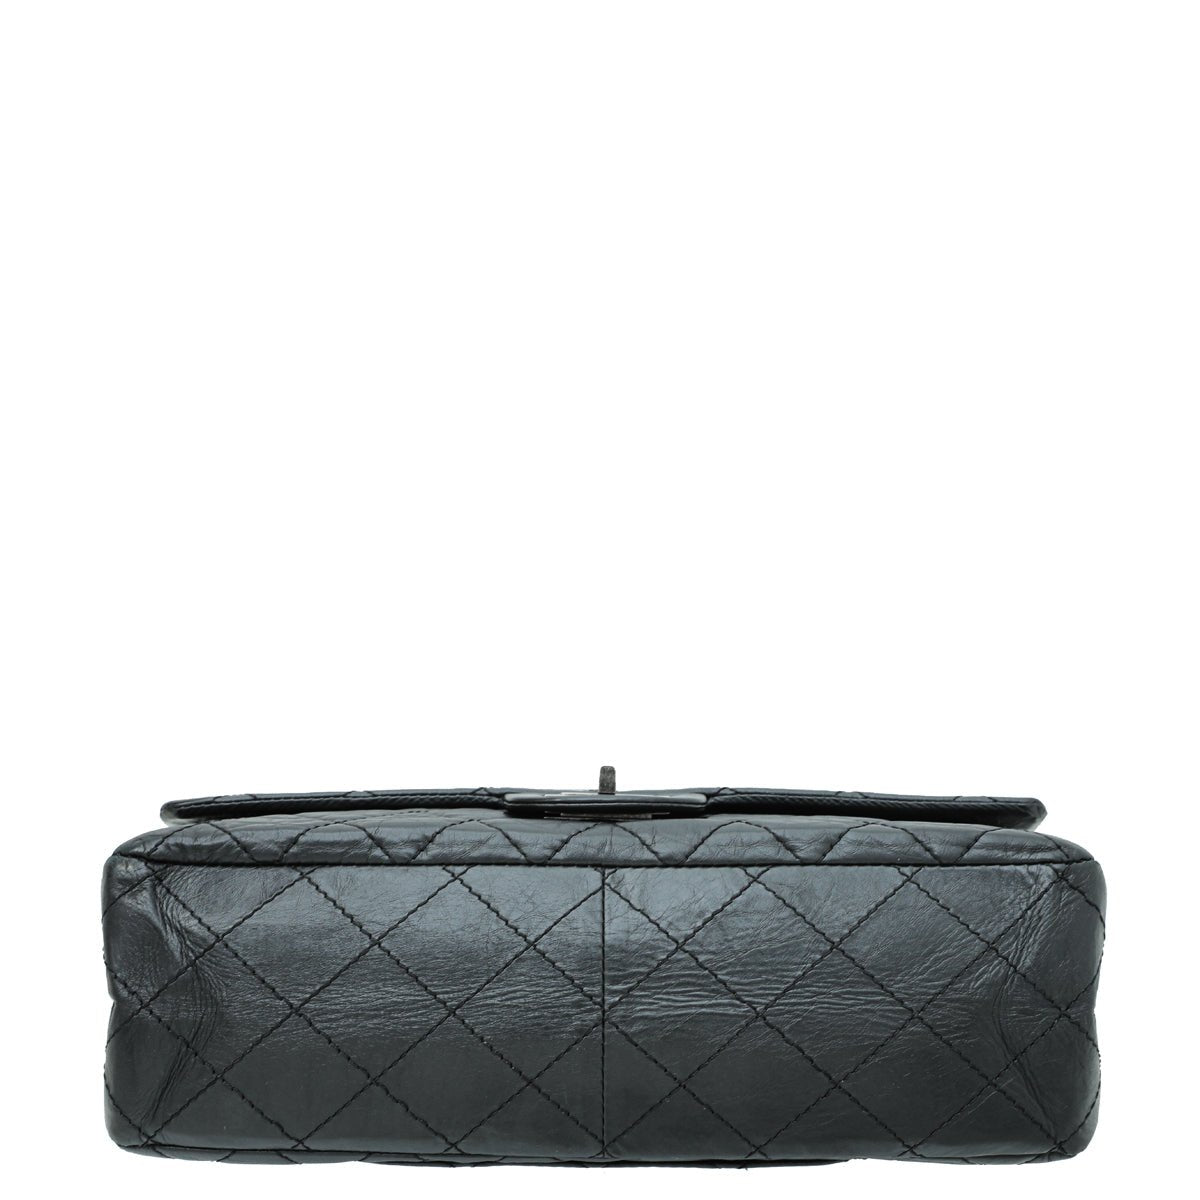 Chanel - Chanel Black Aged 2.55 Reissue Flap Maxi 227 Bag | The Closet